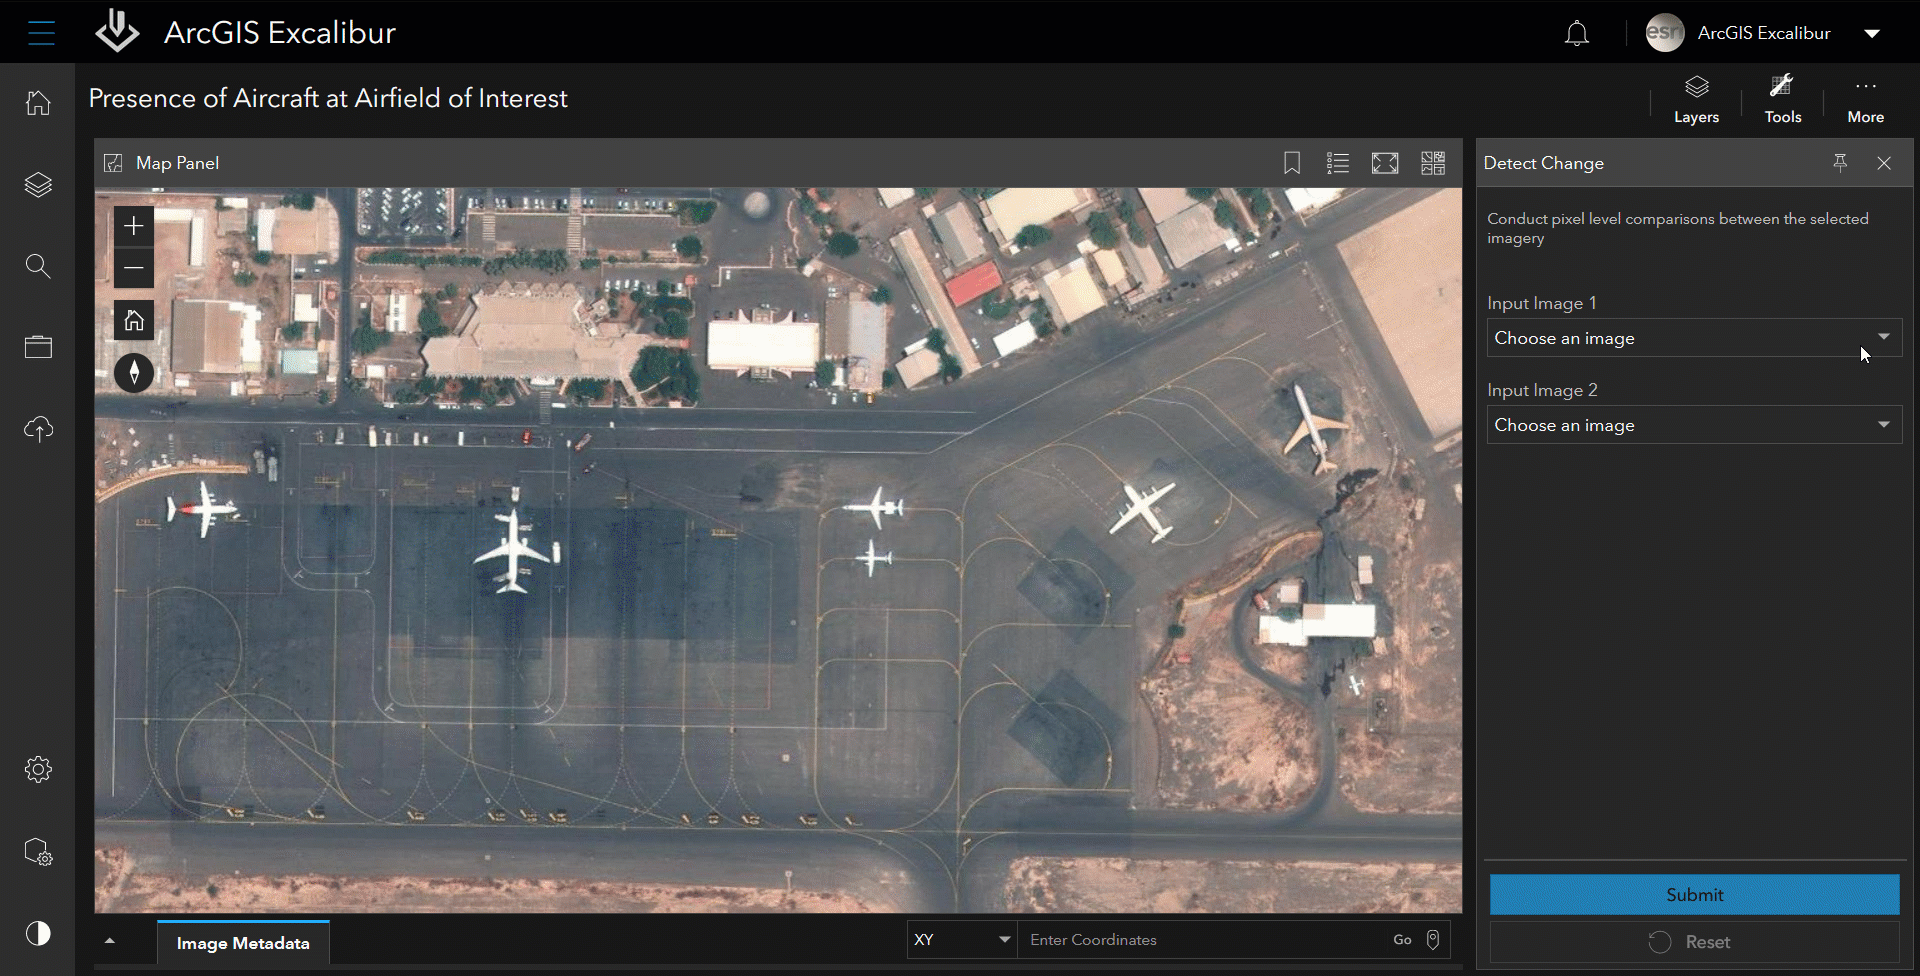 GIF showing movement of airplanes on an airport tarmac opened in ArcGIS Excalibur for enhanced air traffic monitoring 